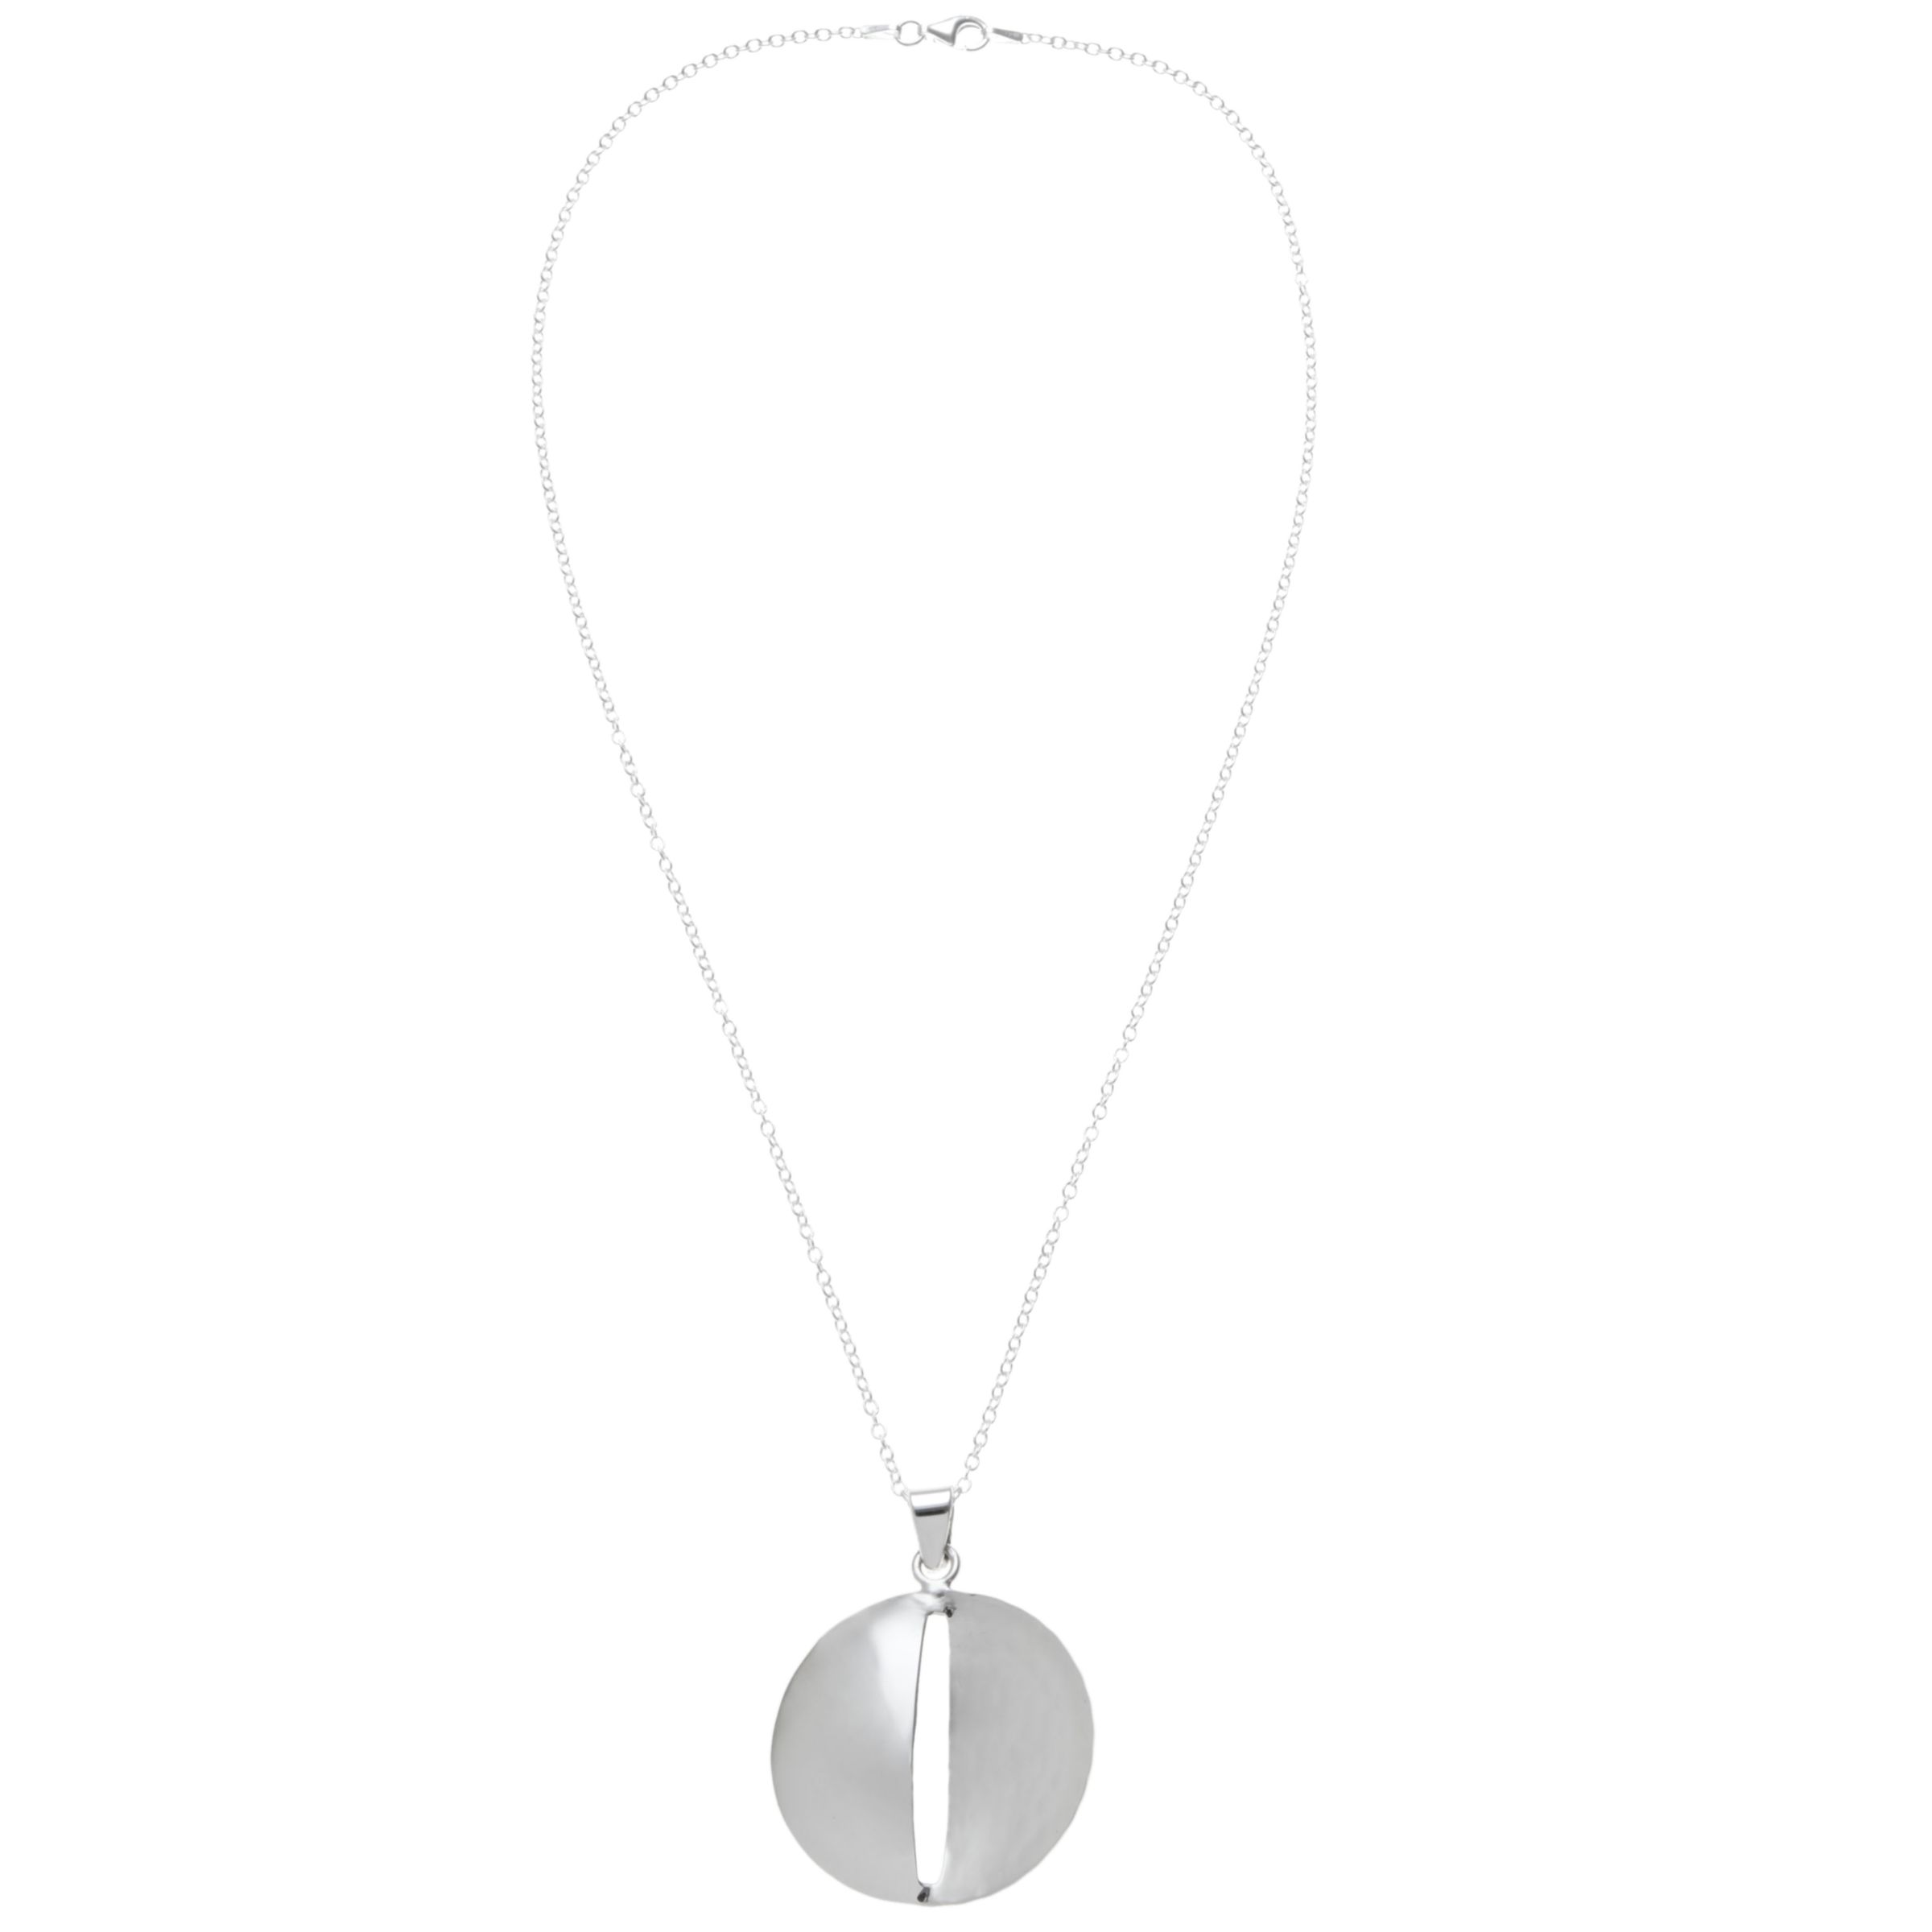 Buy Andea Sterling Silver Smooth And Textured Pendant Necklace Online at johnlewis.com